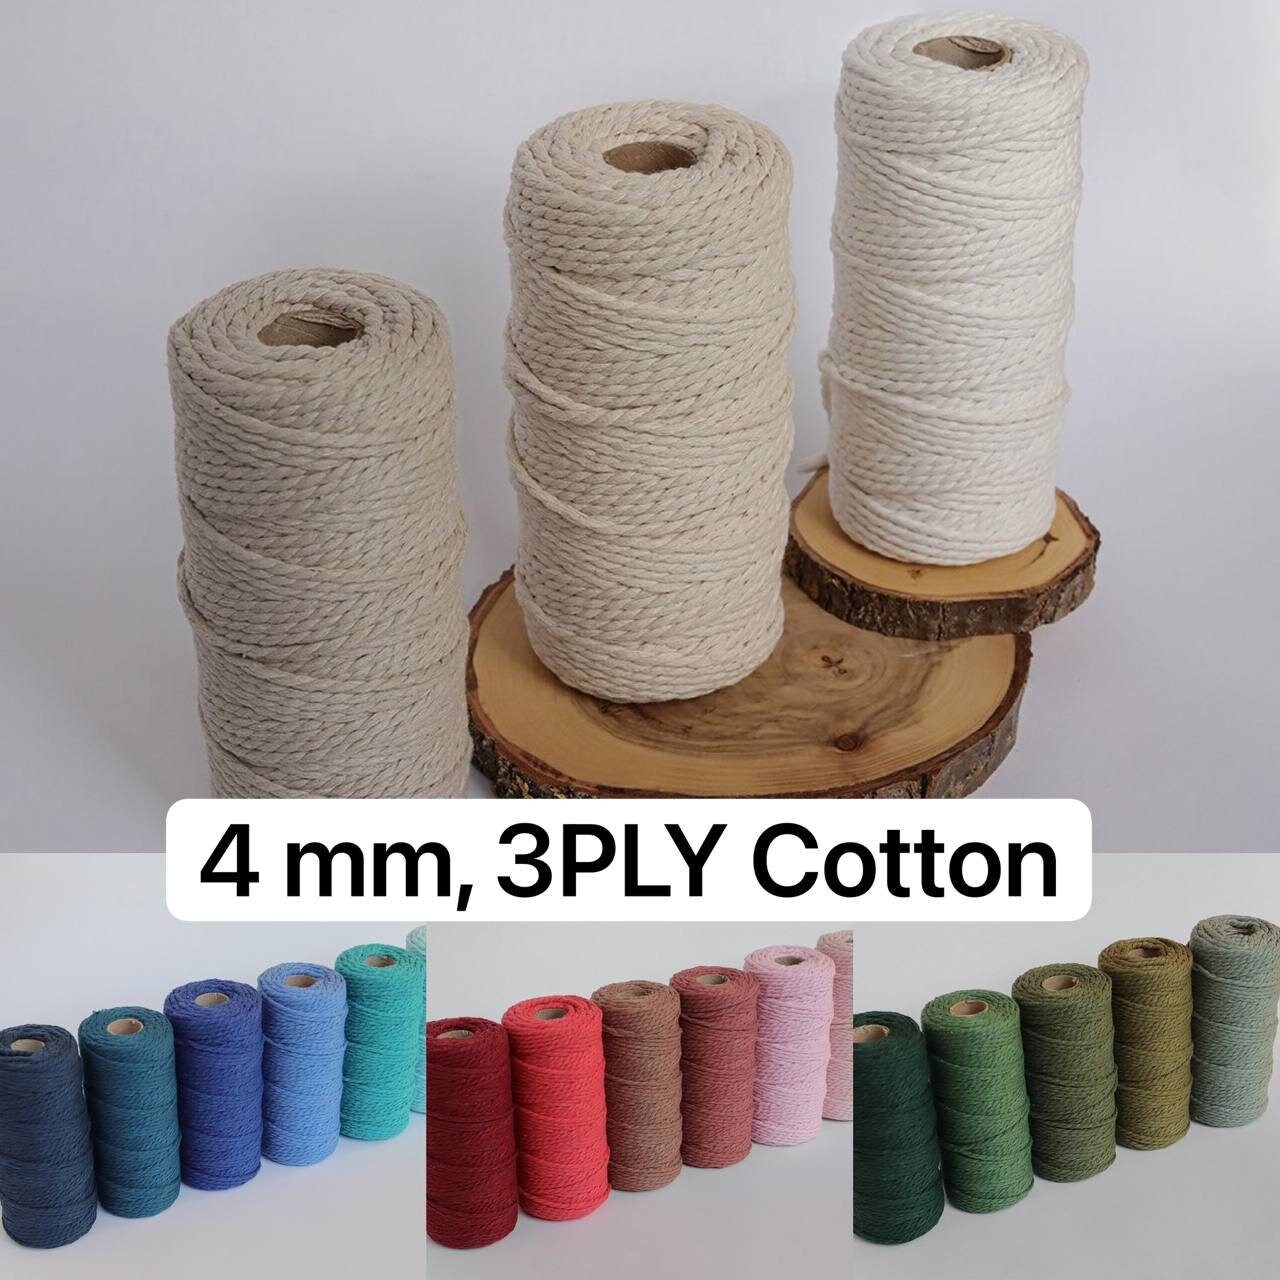 3 Mm Cotton Rope. 1.5 Kg Twisted Cotton Rope. Macrame Rope. Macrame Cord  About 410 M Cotton Cord 3 Strand Rope 130 M Cotton String 0,5 Kg 